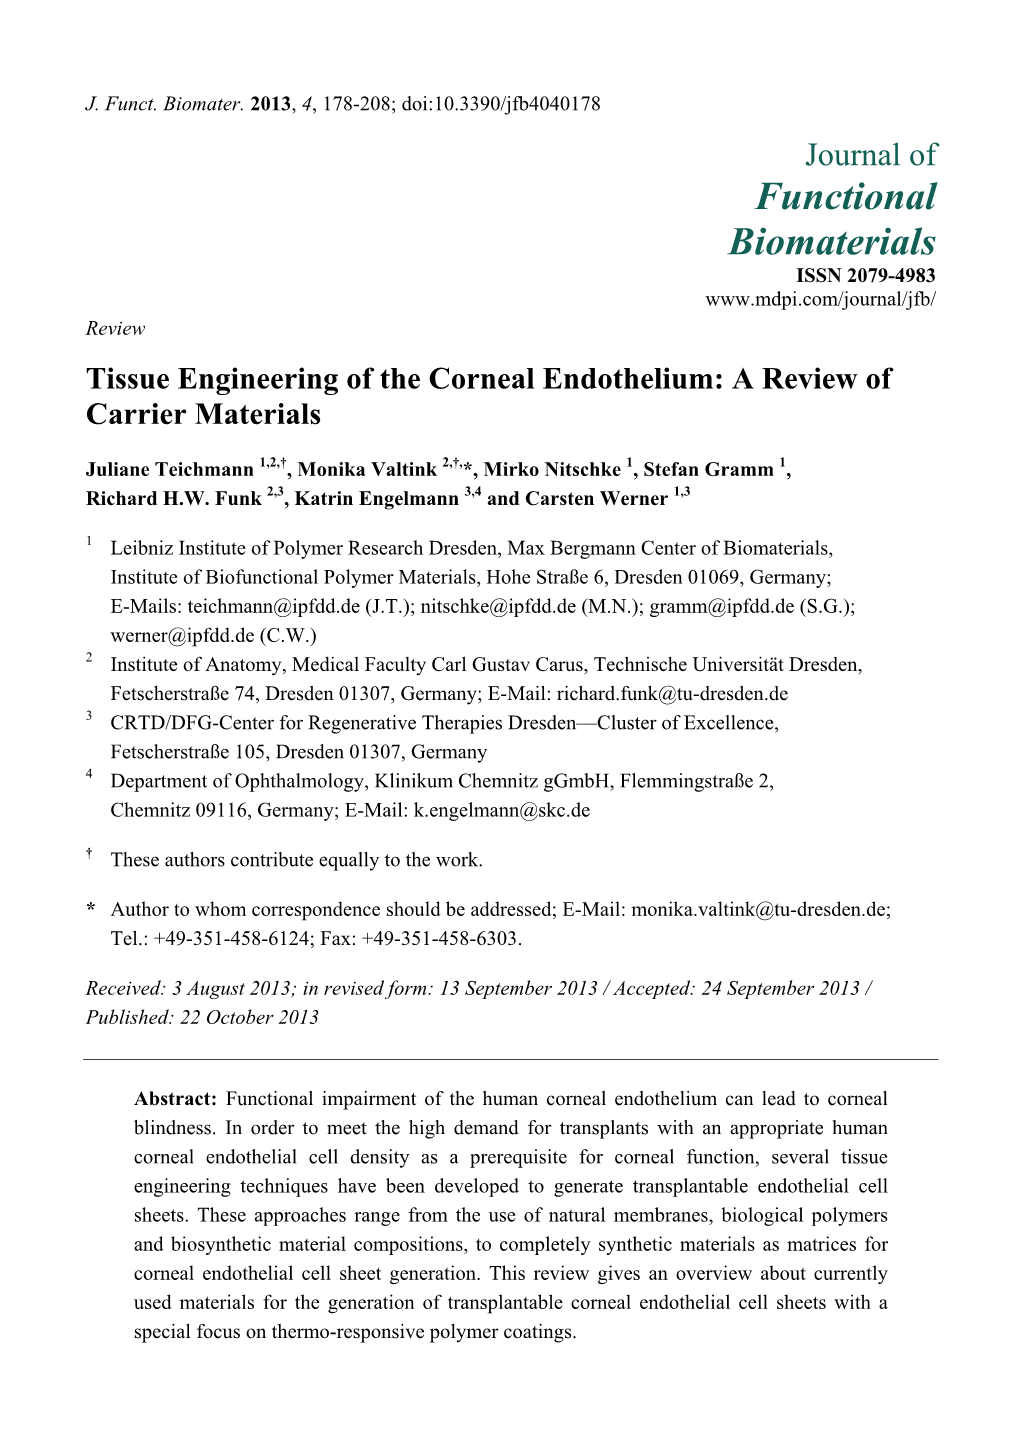 Tissue Engineering of the Corneal Endothelium: a Review of Carrier Materials